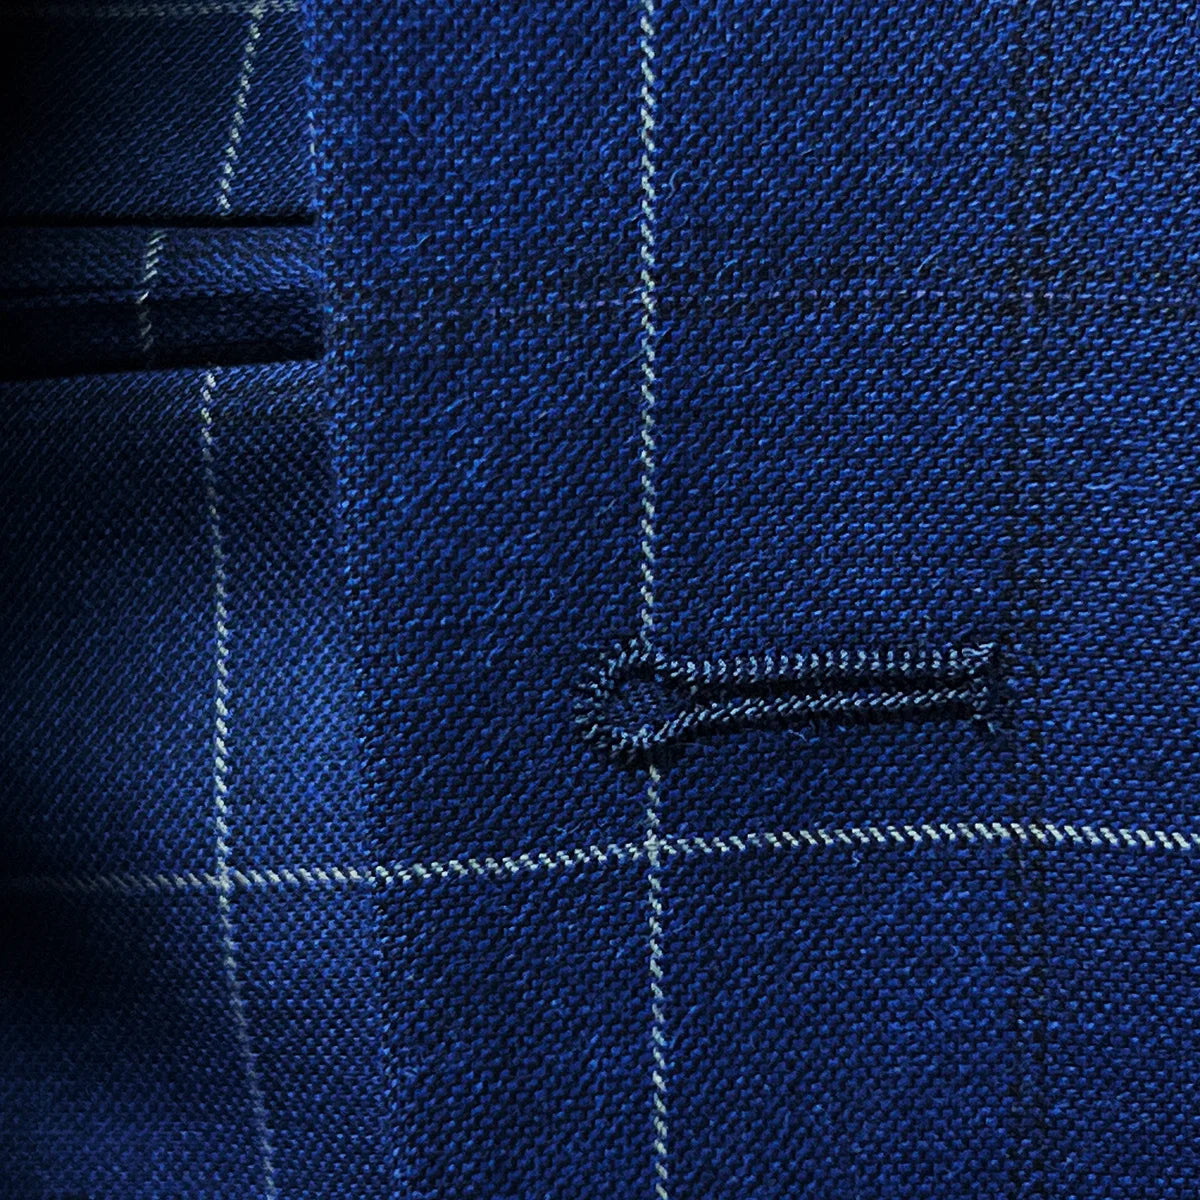 Close-up of buttonholes on a navy blue windowpane suit